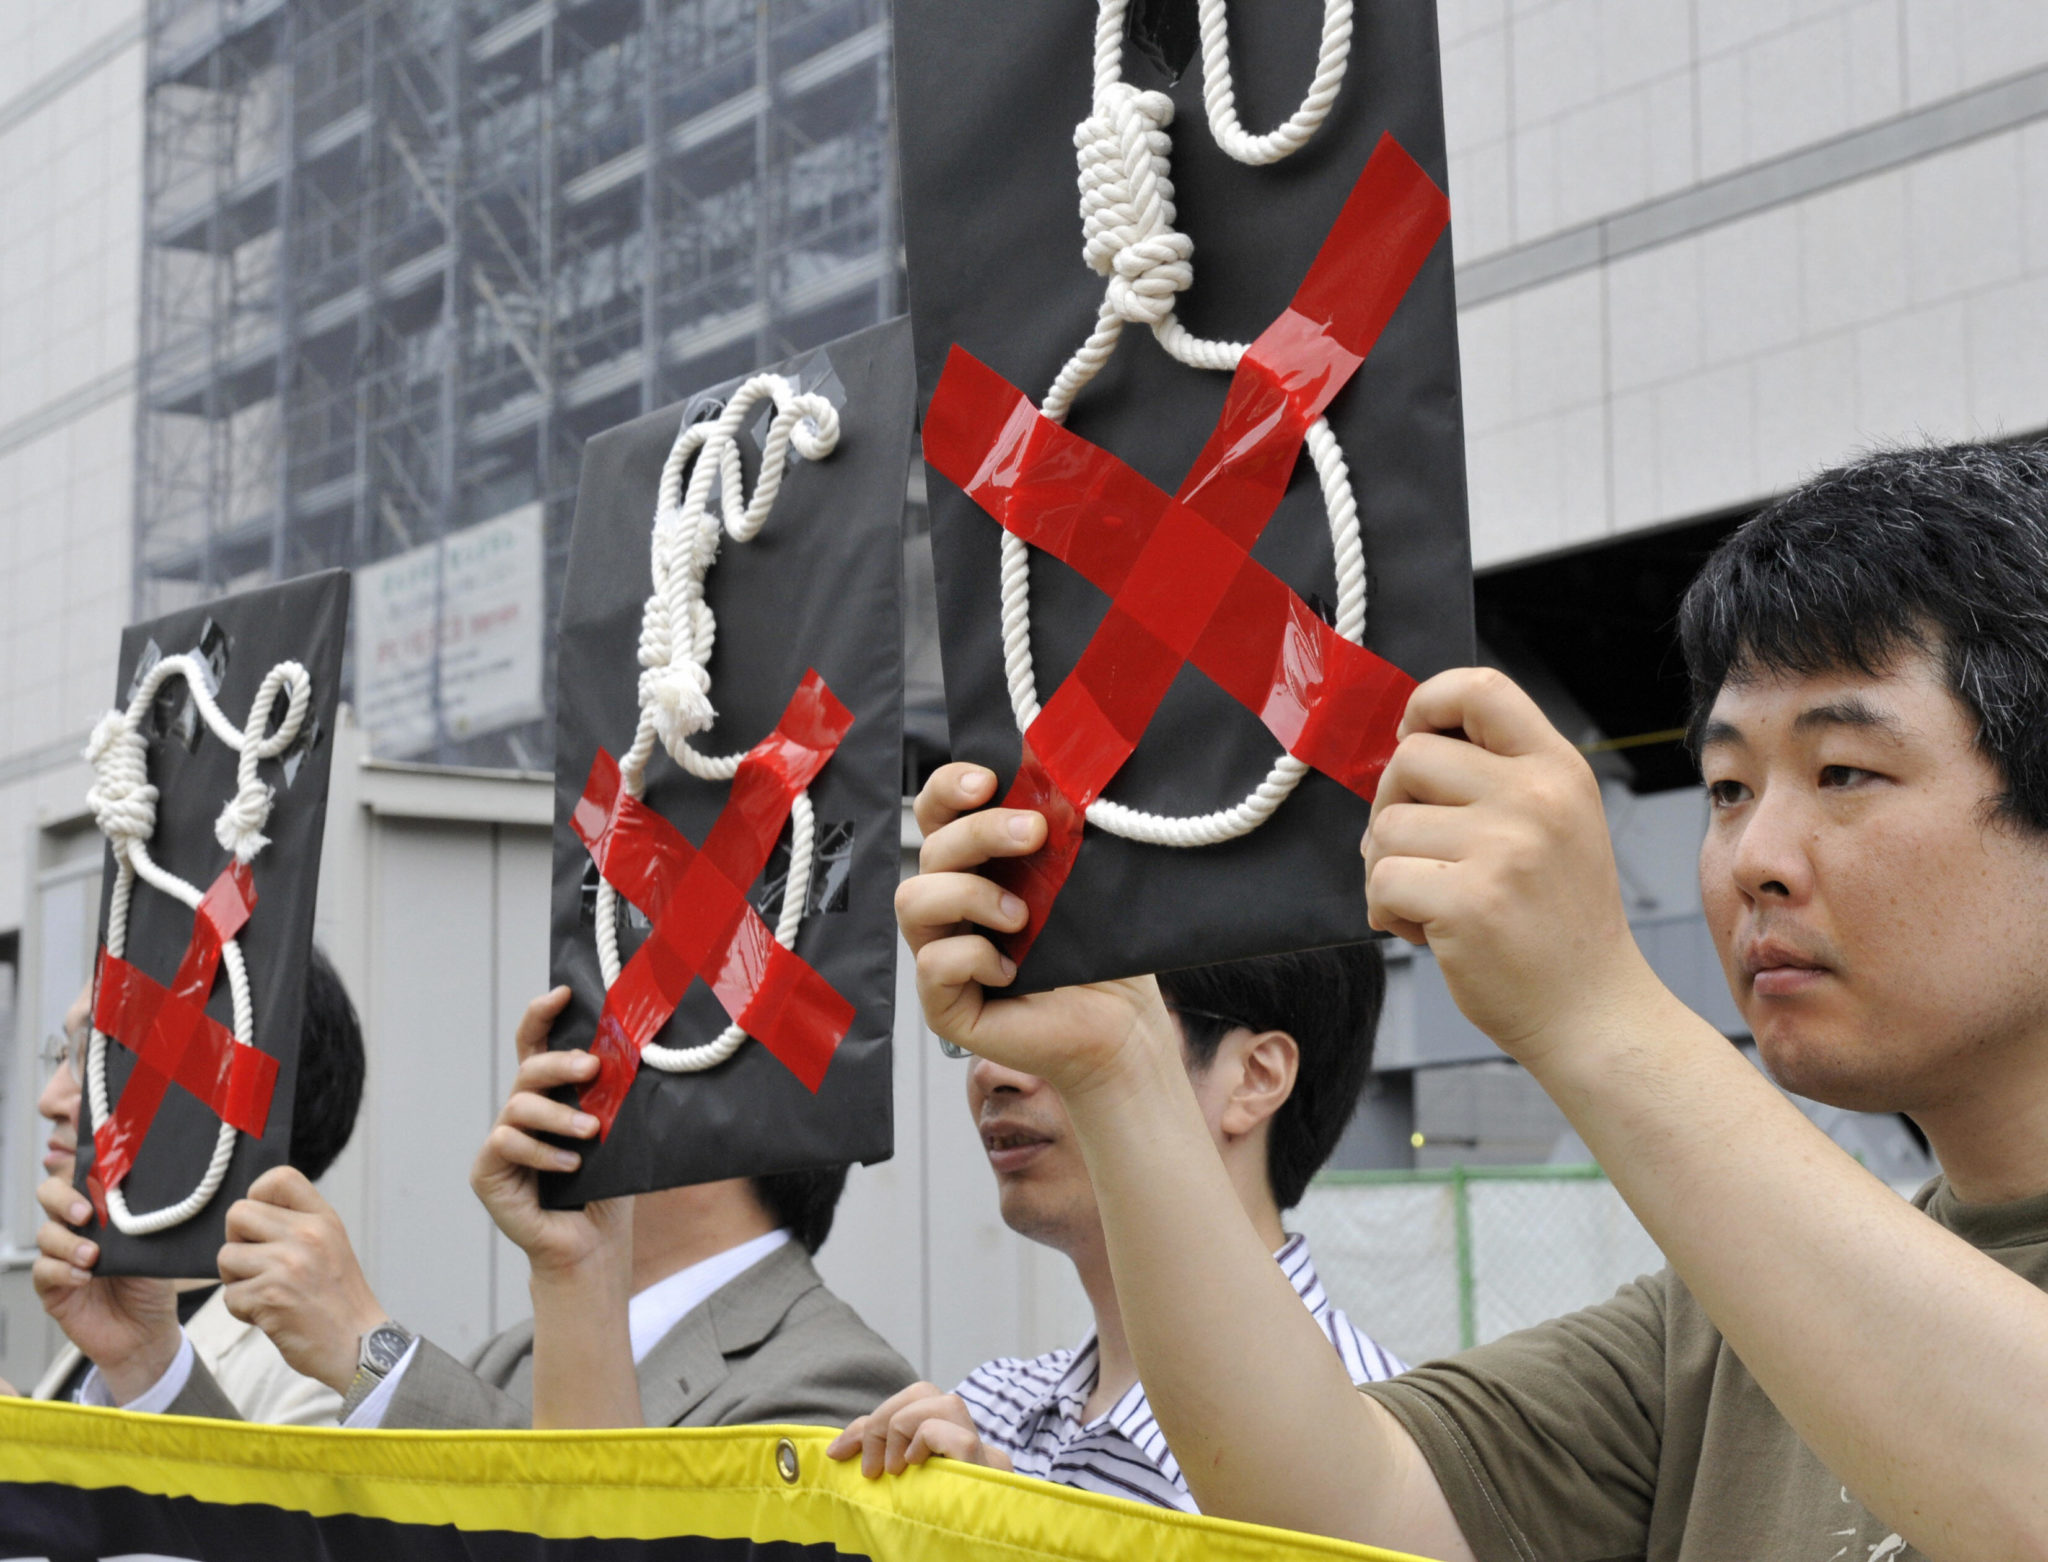 Japan: Two men hanged as reprehensible executions continue